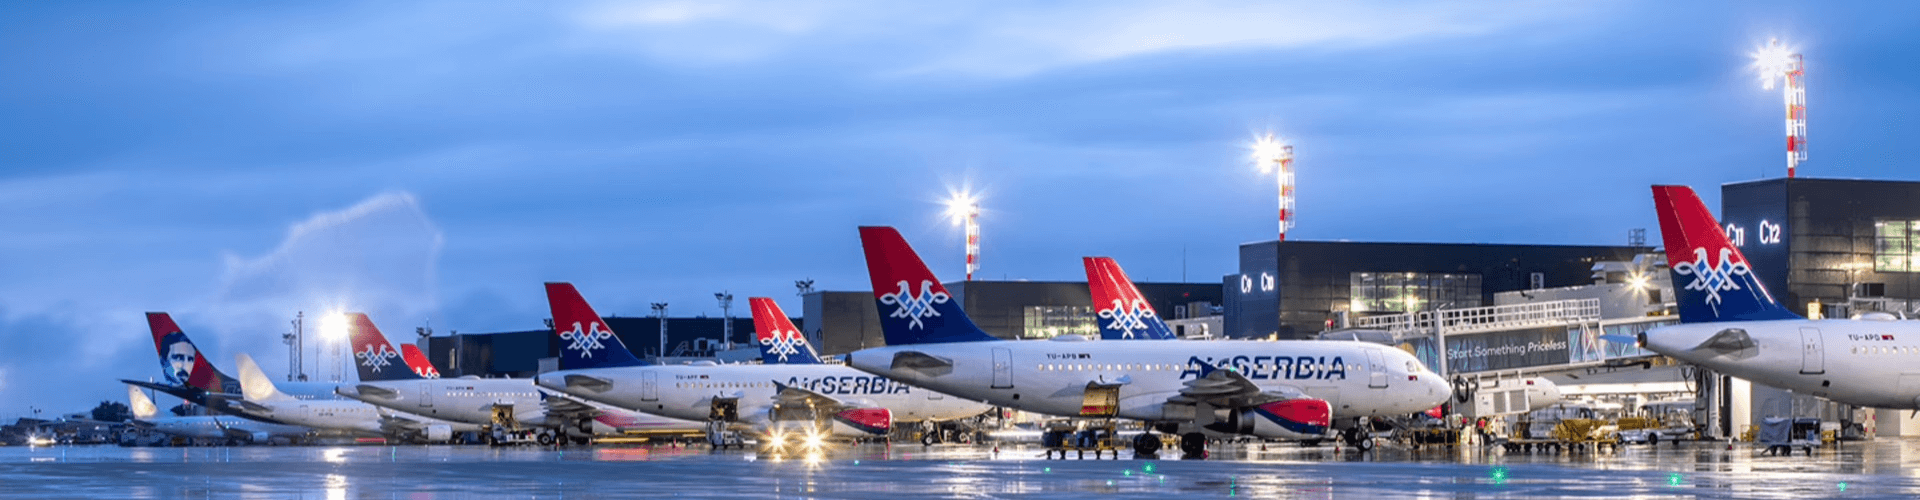 air serbia national airline of serbia